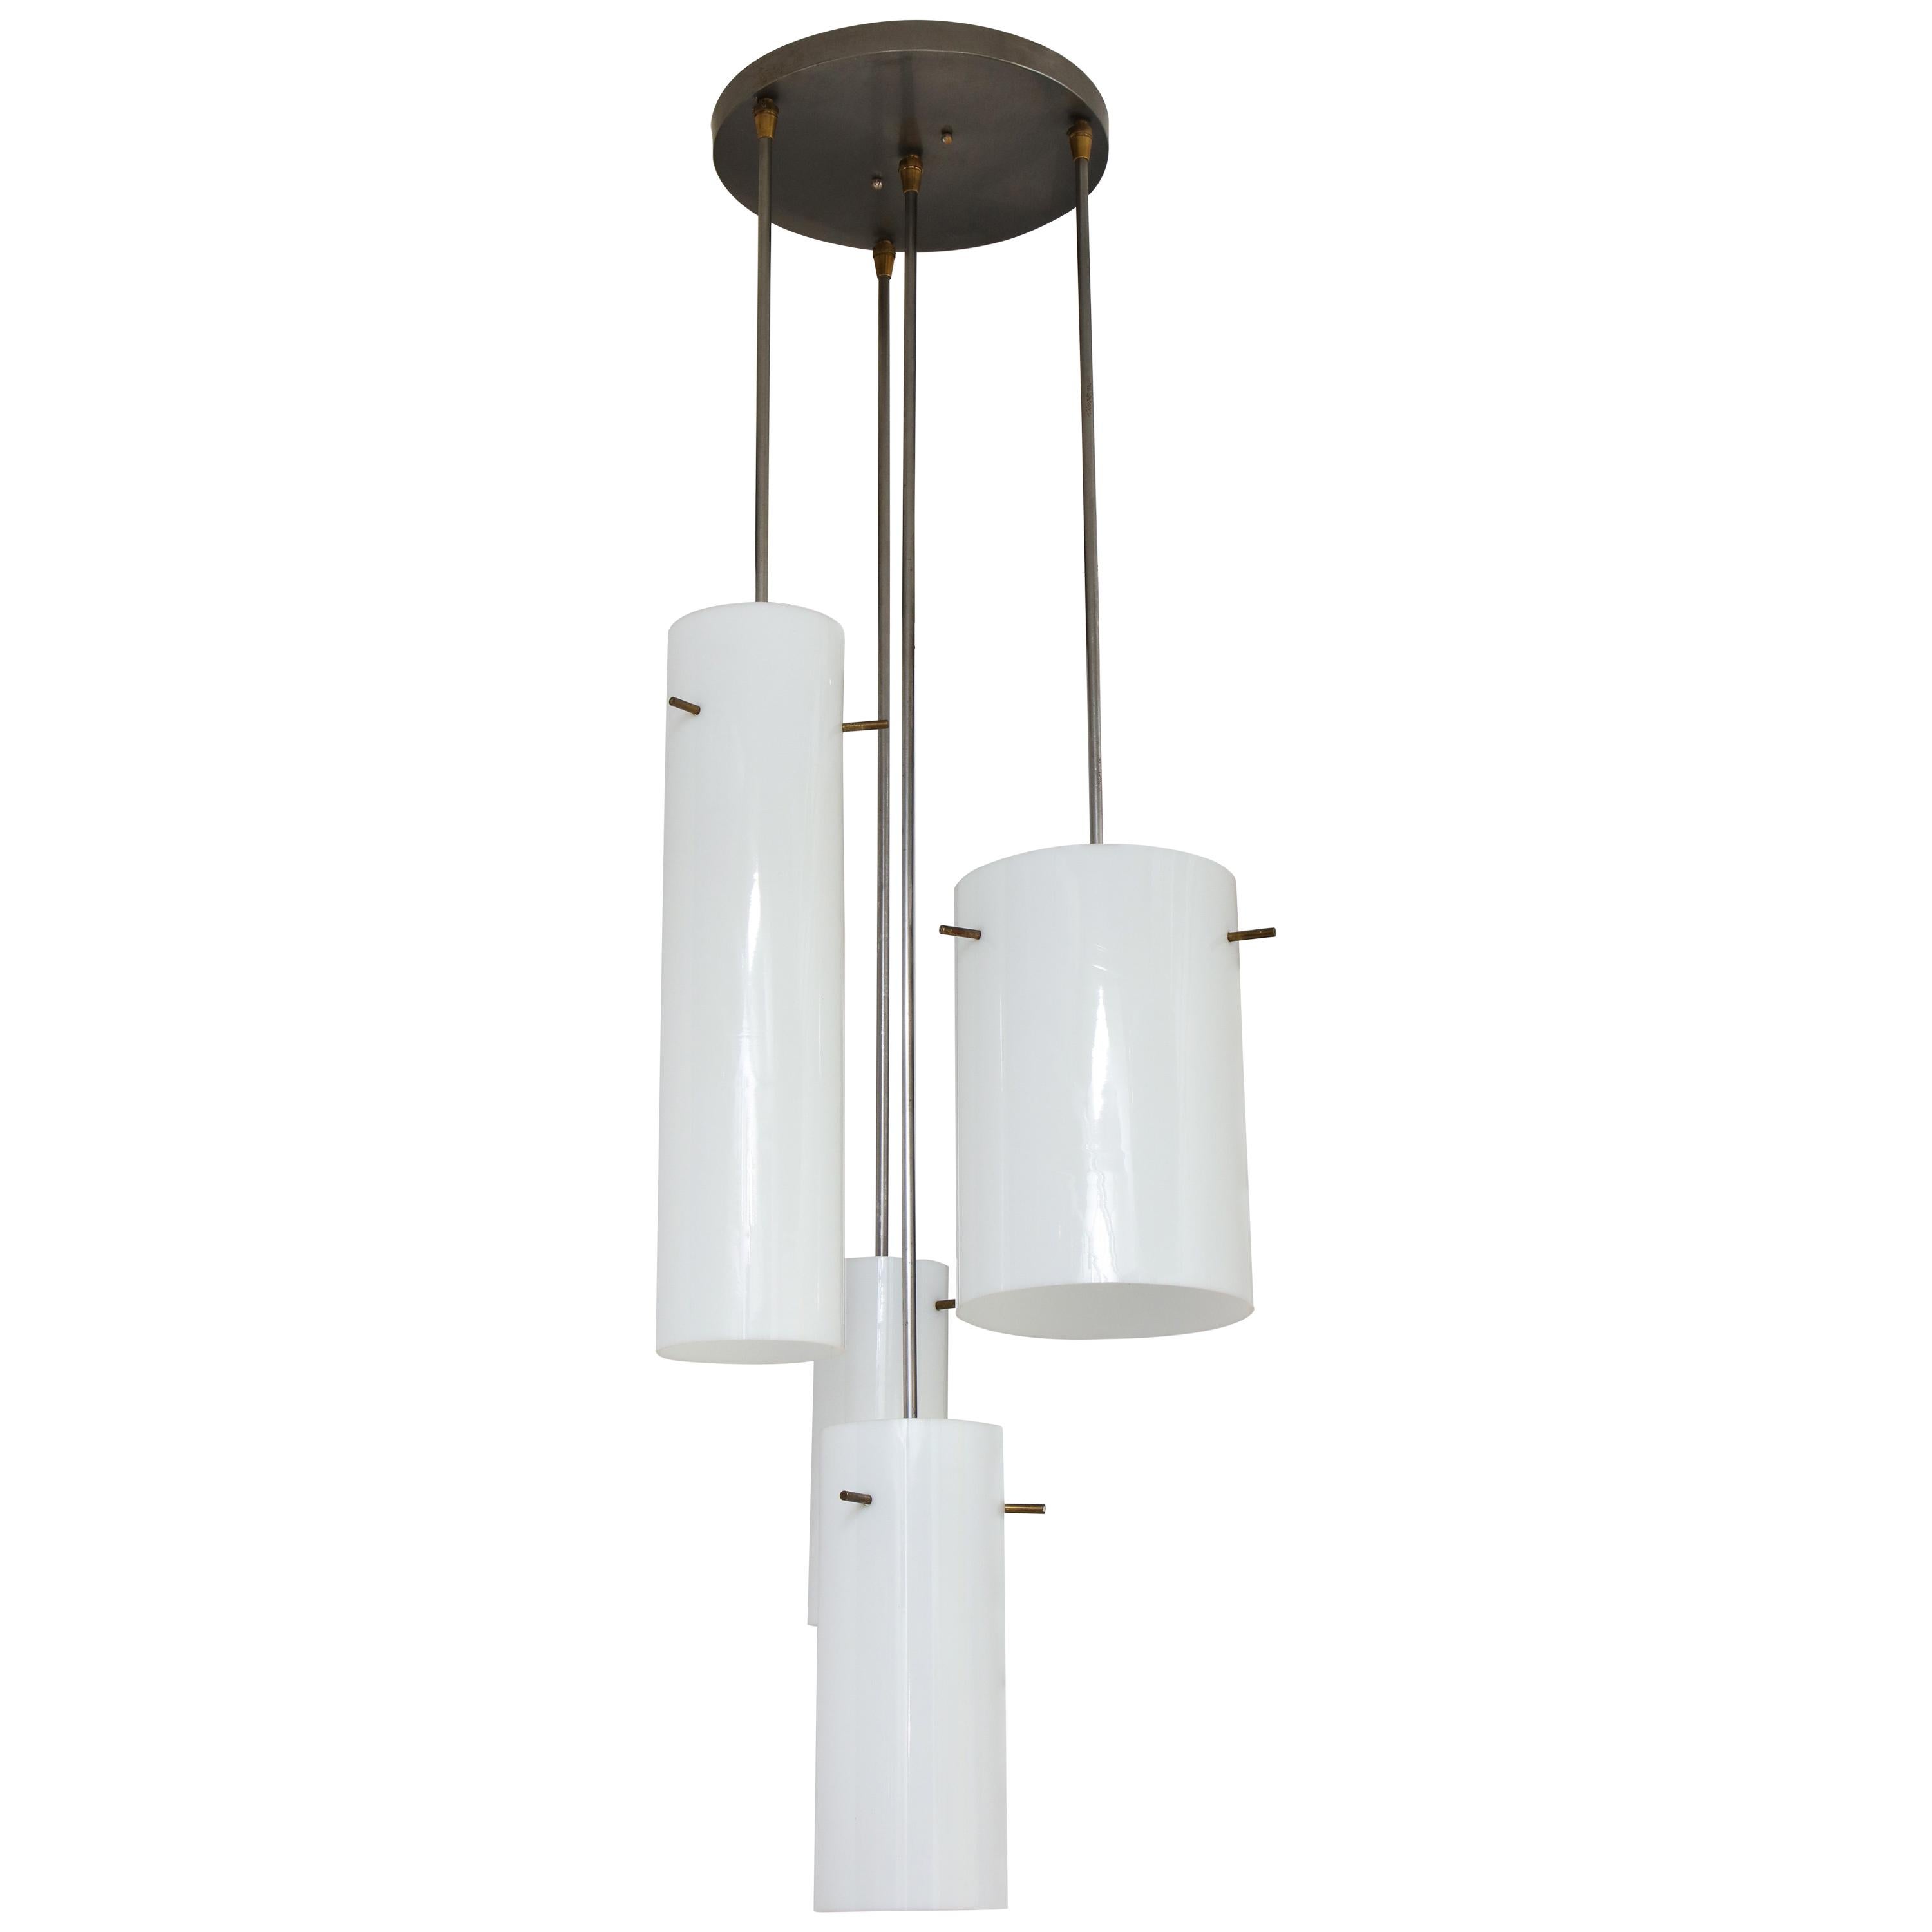 Rare hanging fixture composed of four glass cylinders of varying heights and diameters, arranged in a spiral pattern; each held by three protruding brass-plated rods. Designed by Paul Mayen and produced by Habitat, circa 1958. An artful composition,